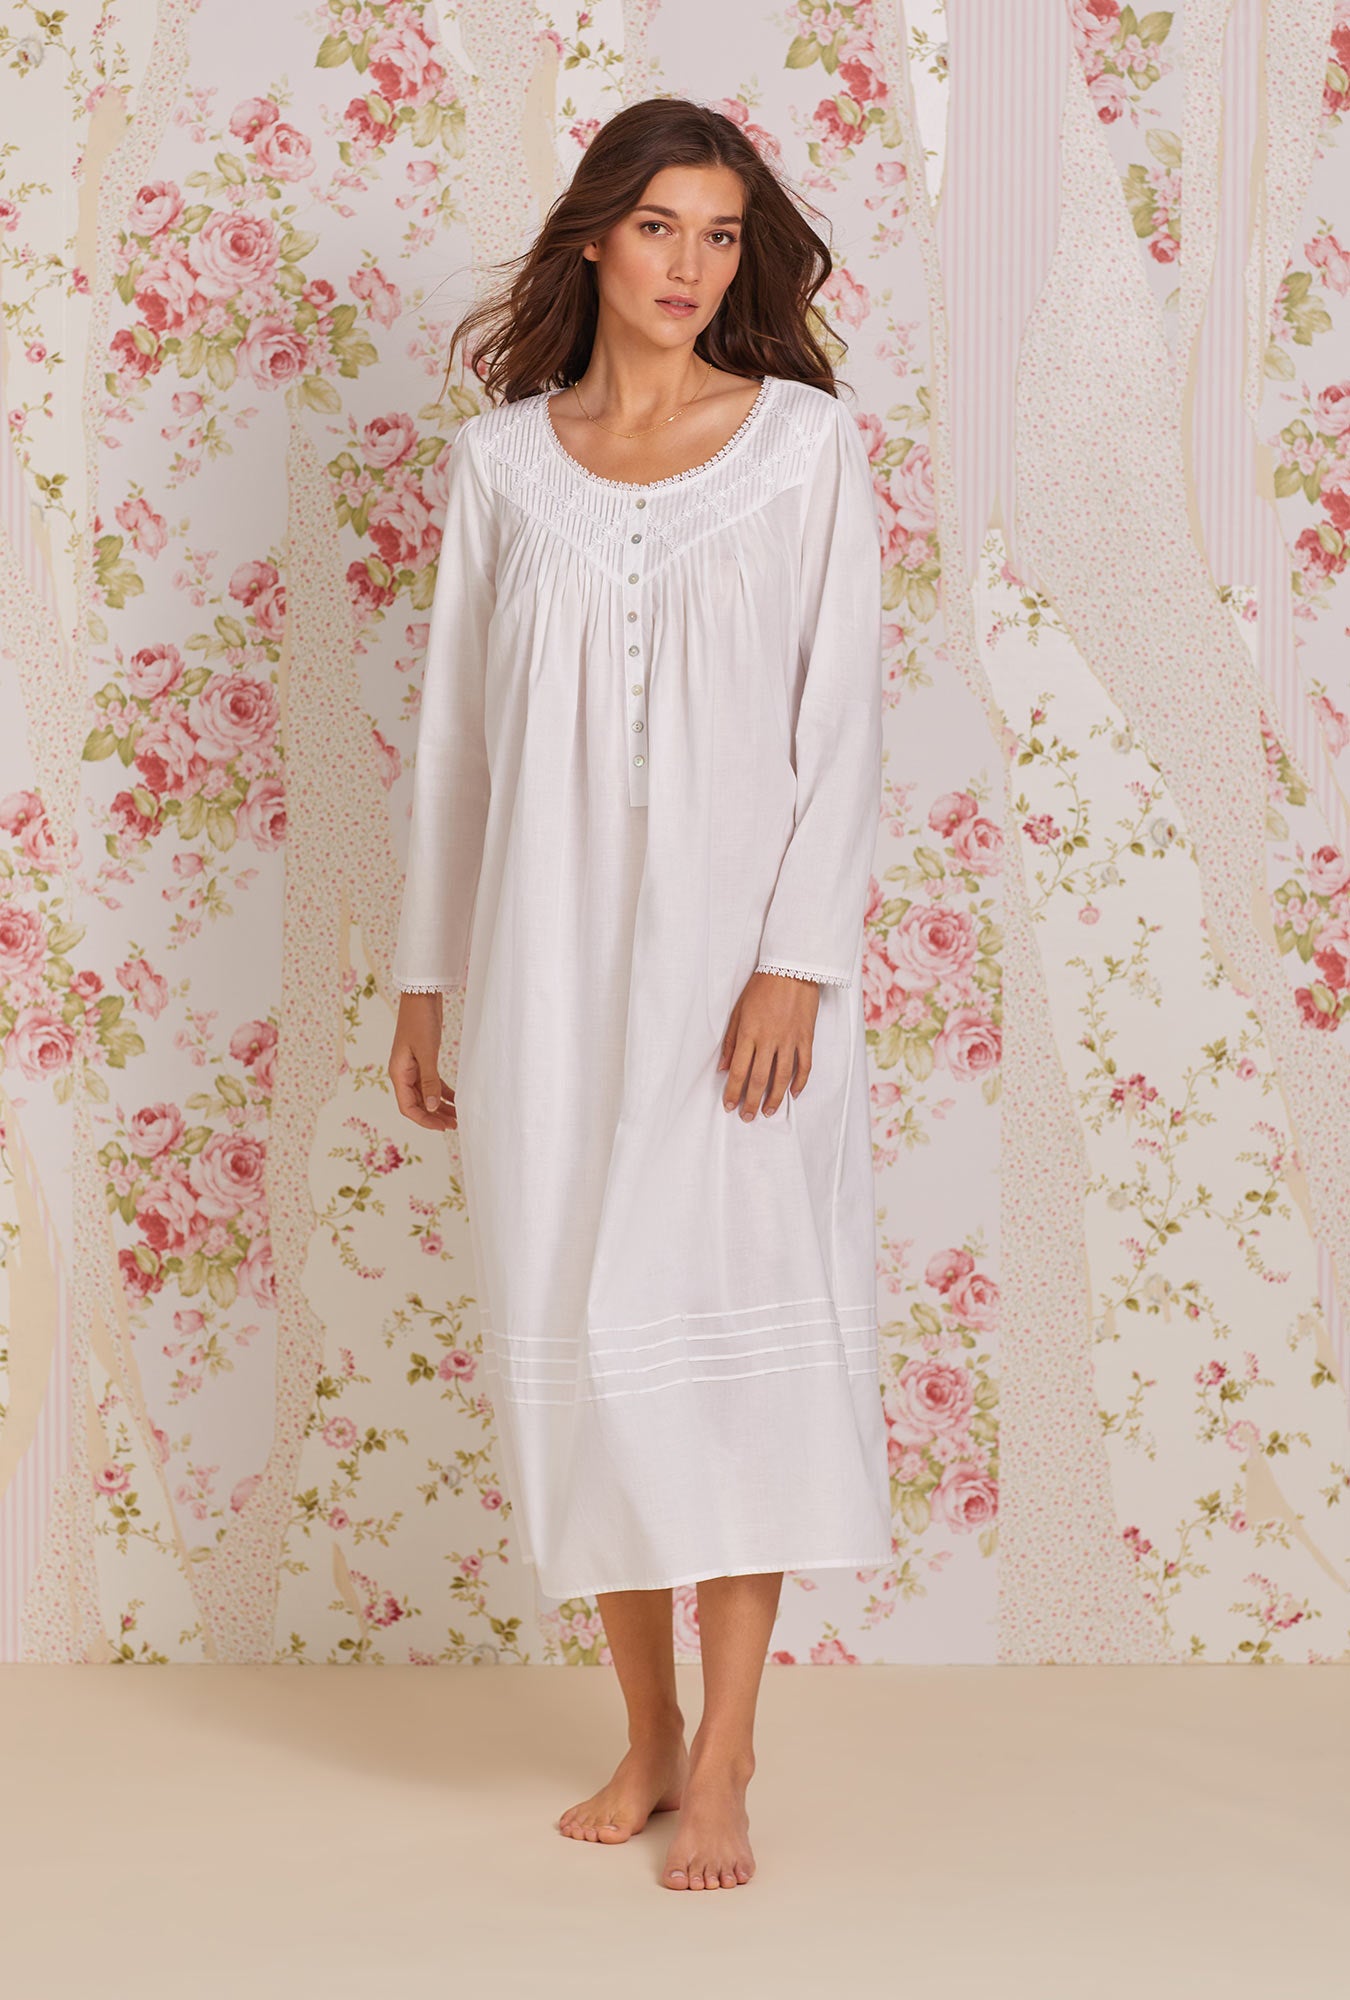 All Sleepwear - Nightgowns, Pajamas & Robes – Page 3 – Miss Elaine